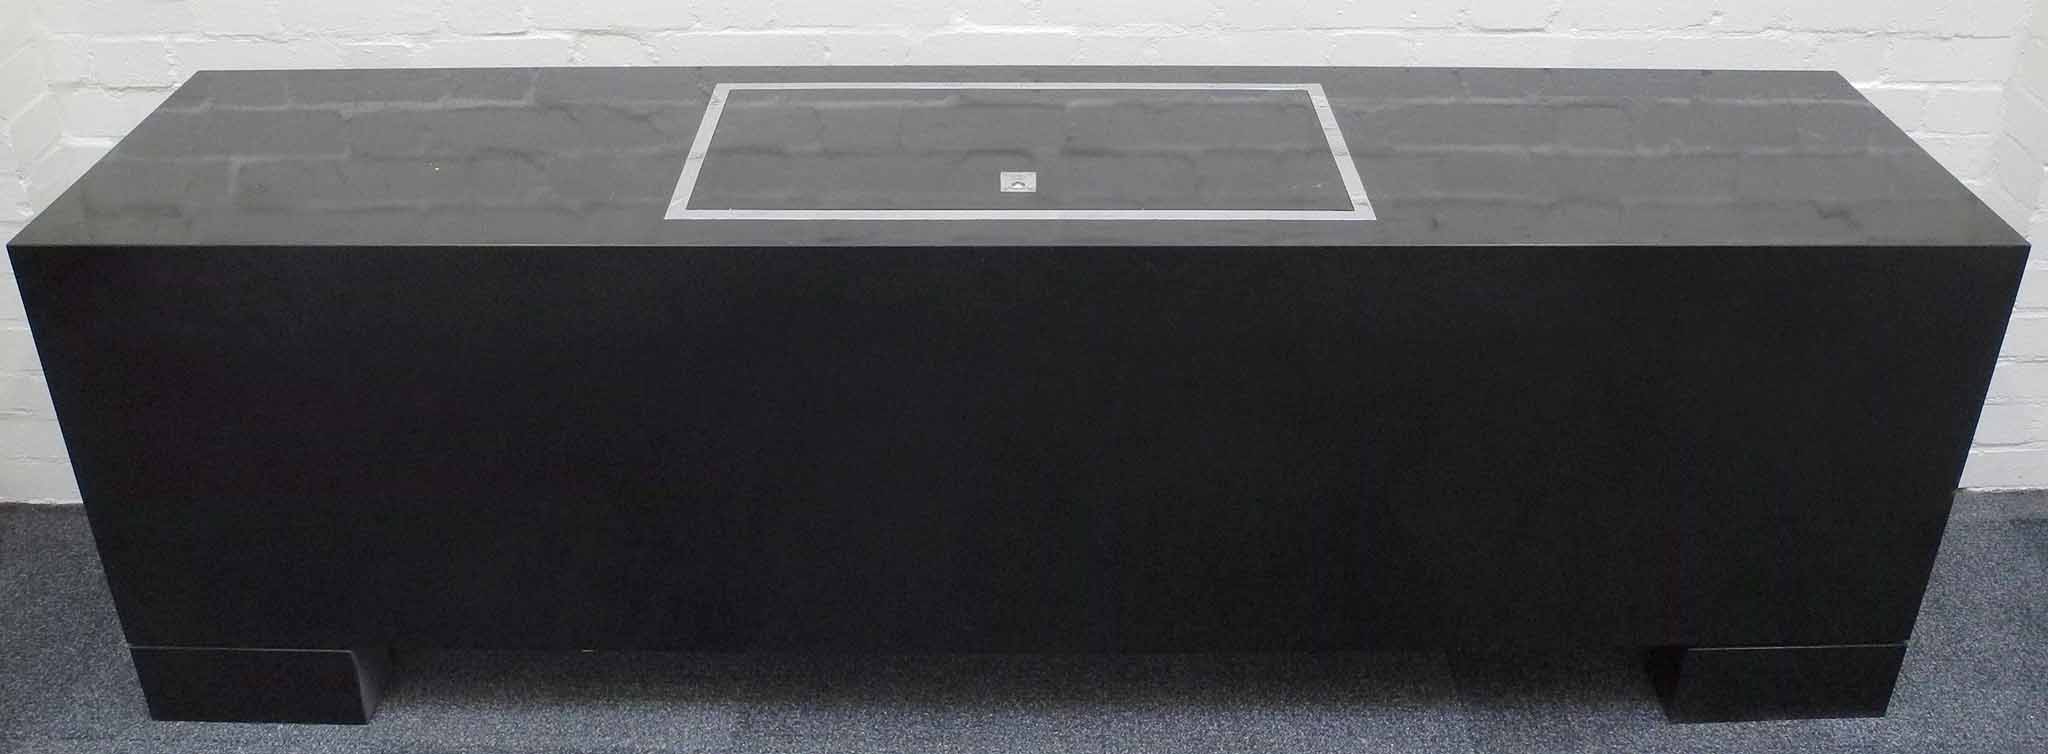 A Mario Sabot sideboard, circa 1970, black lacquer surfaces with chrome border and handle on